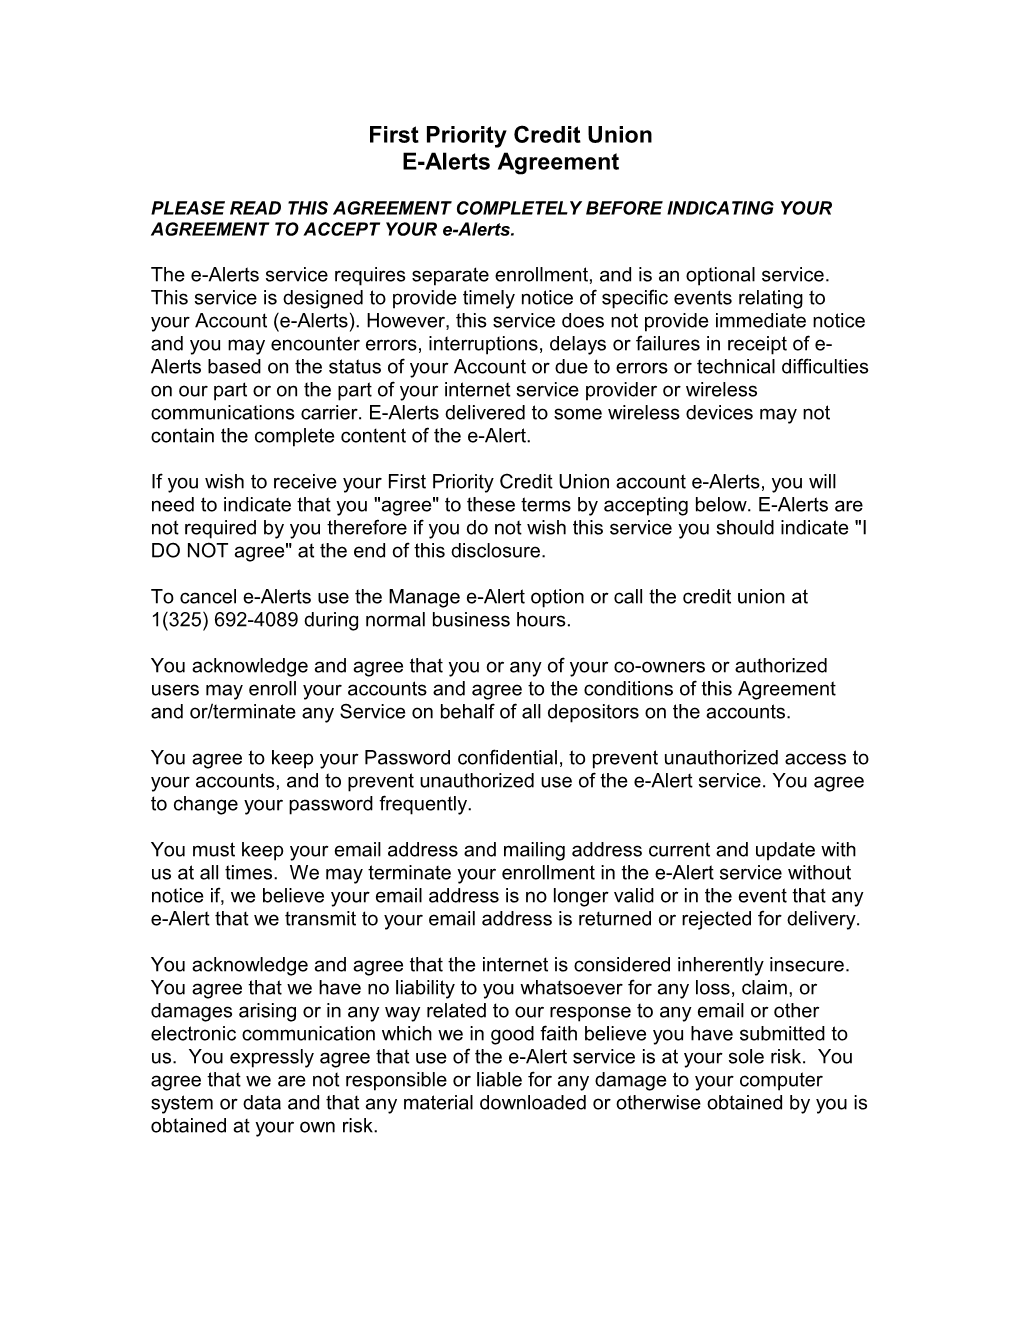 PLEASE READ THIS AGREEMENT COMPLETELY BEFORE INDICATING YOUR AGREEMENT to ACCEPT YOUR E-Alerts